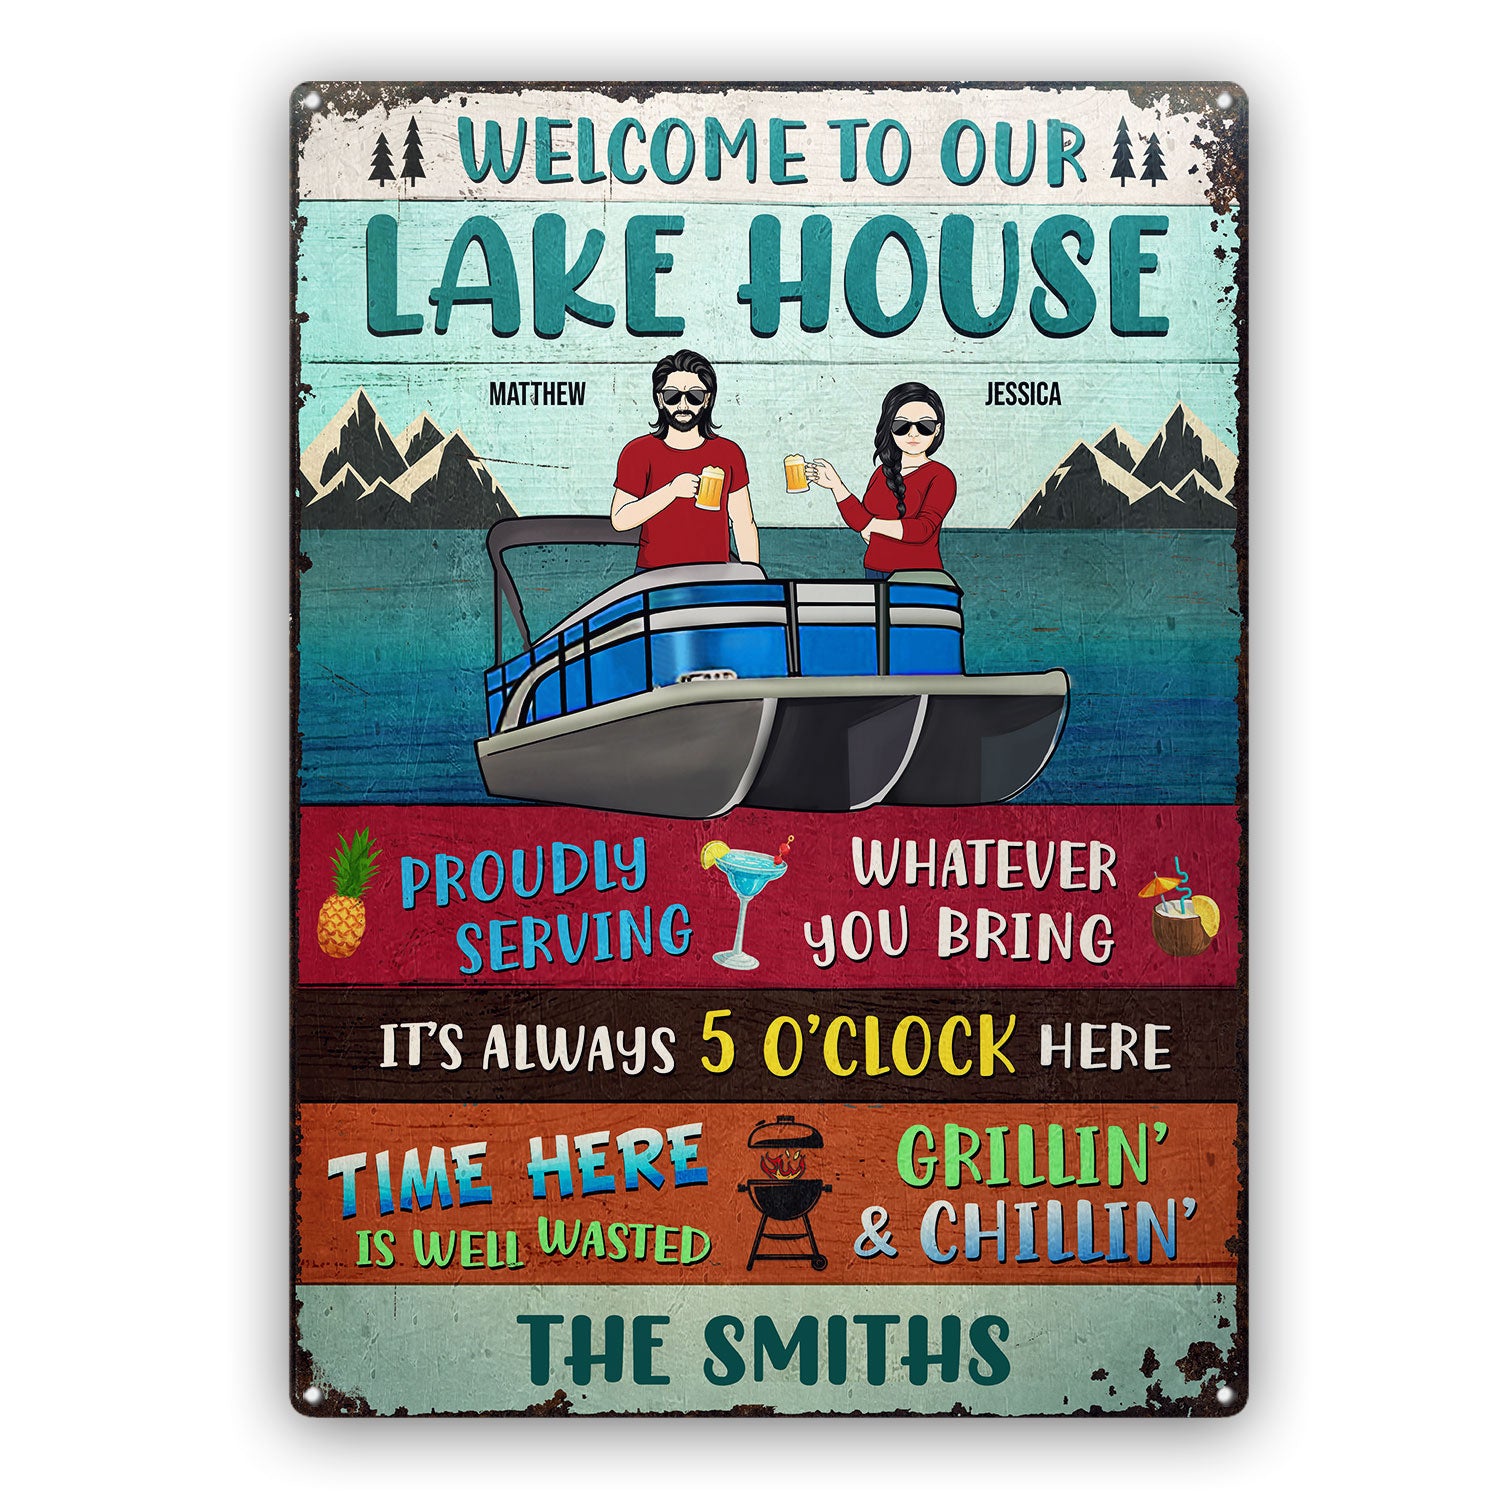 Welcome To Our Lake House Pontoon Time Here Is Well Wasted - Gift For Pontoon Owners - Personalized Custom Classic Metal Signs